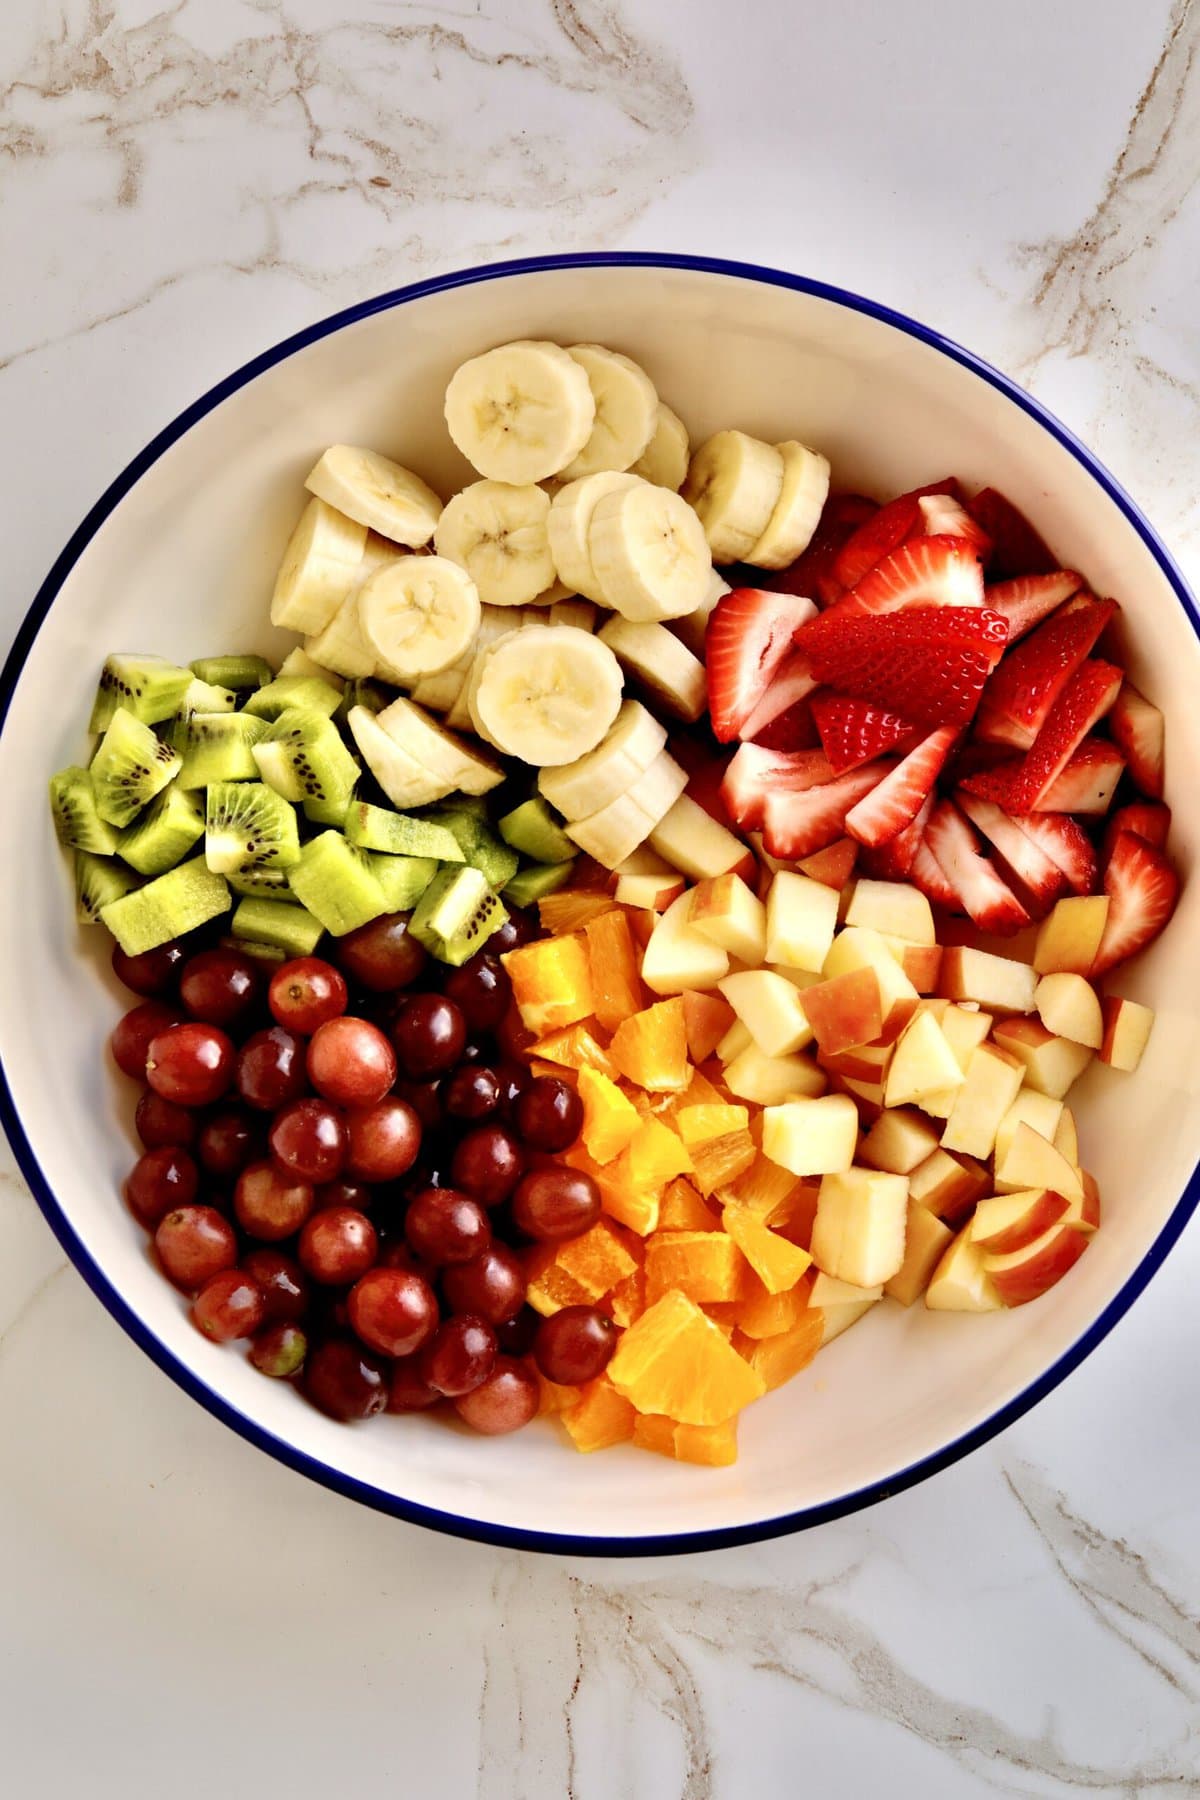 How to make Italian fruit salad recipe- chopping all the fruit and adding it to the bowl.